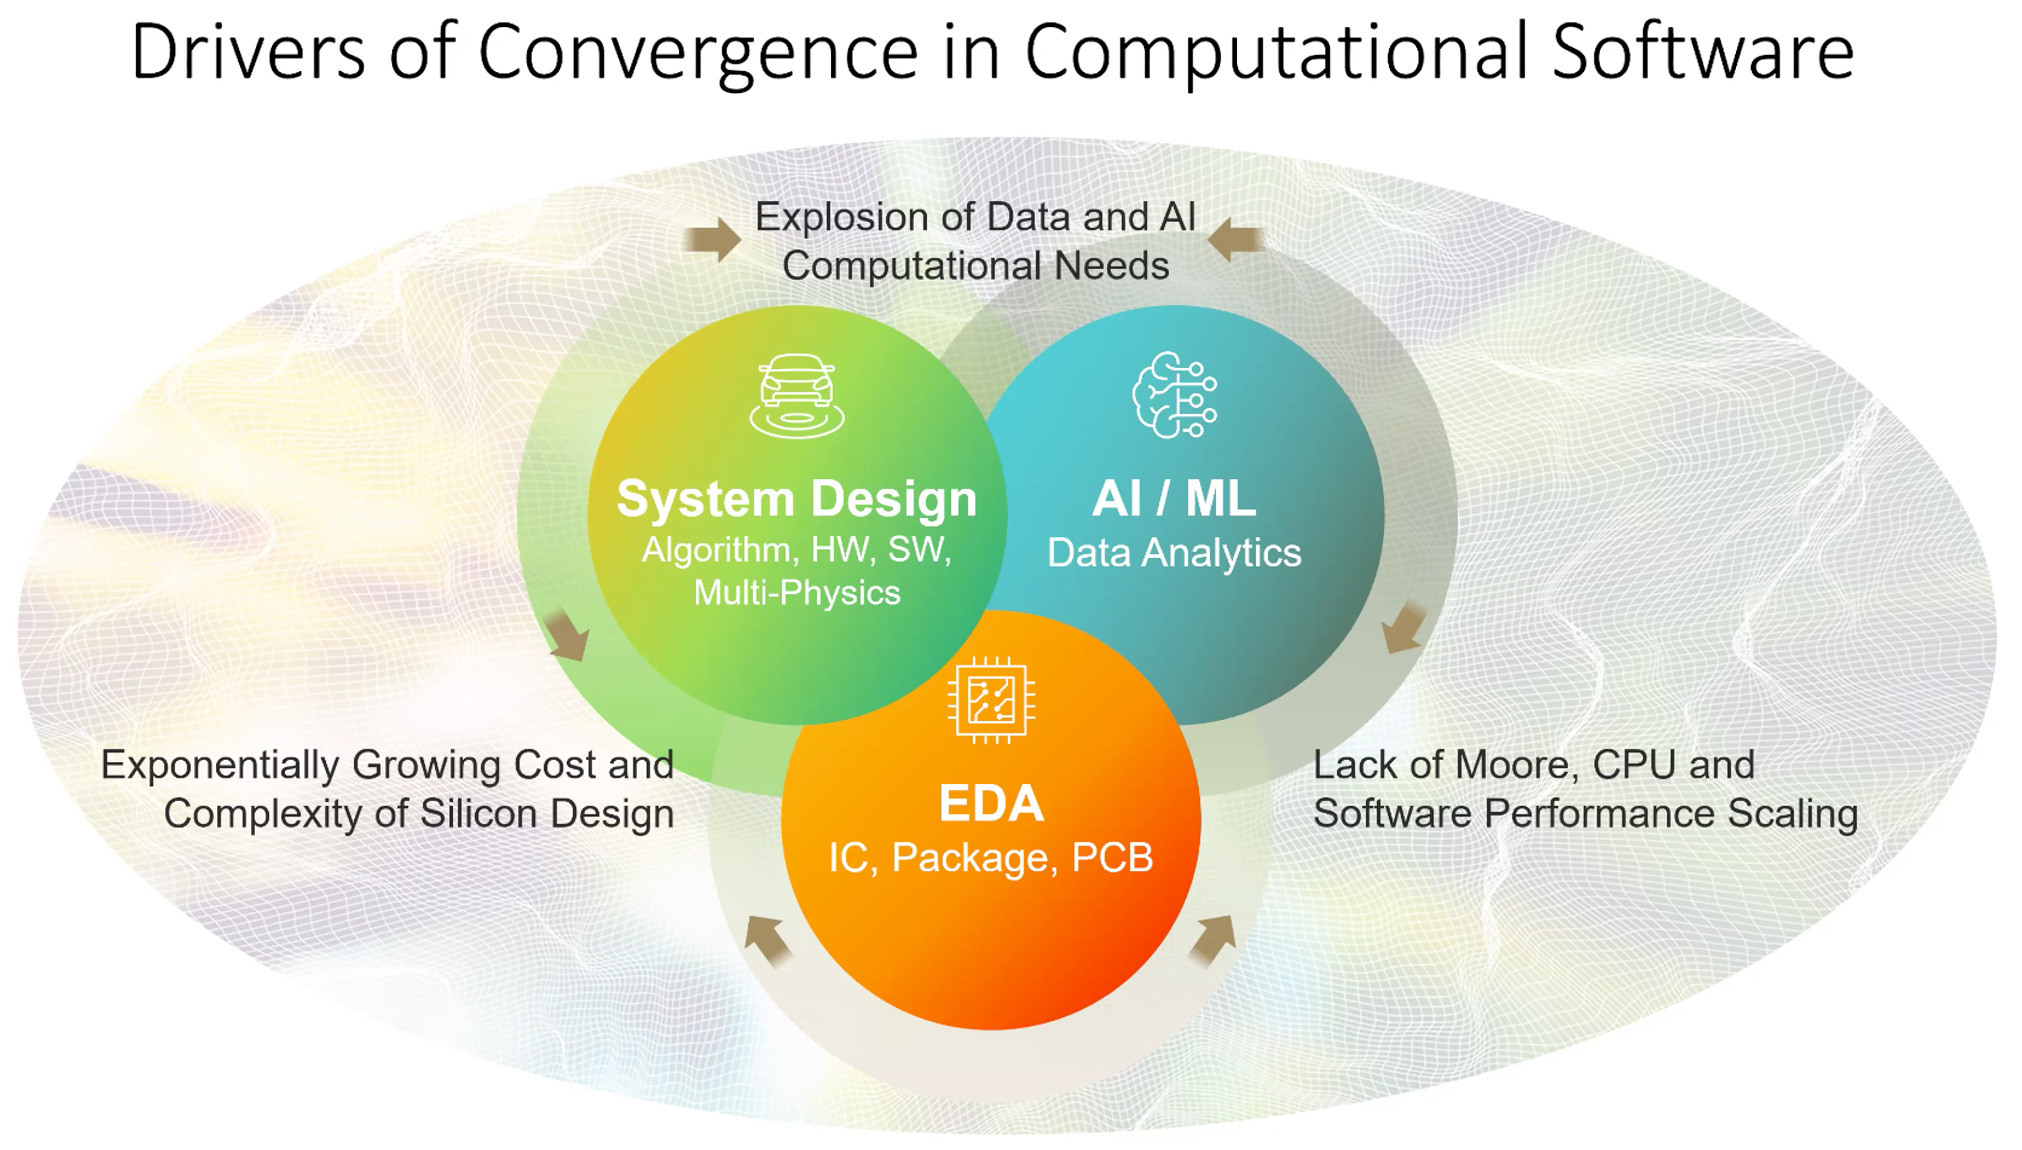 Drivers of Convergence in Computational Software